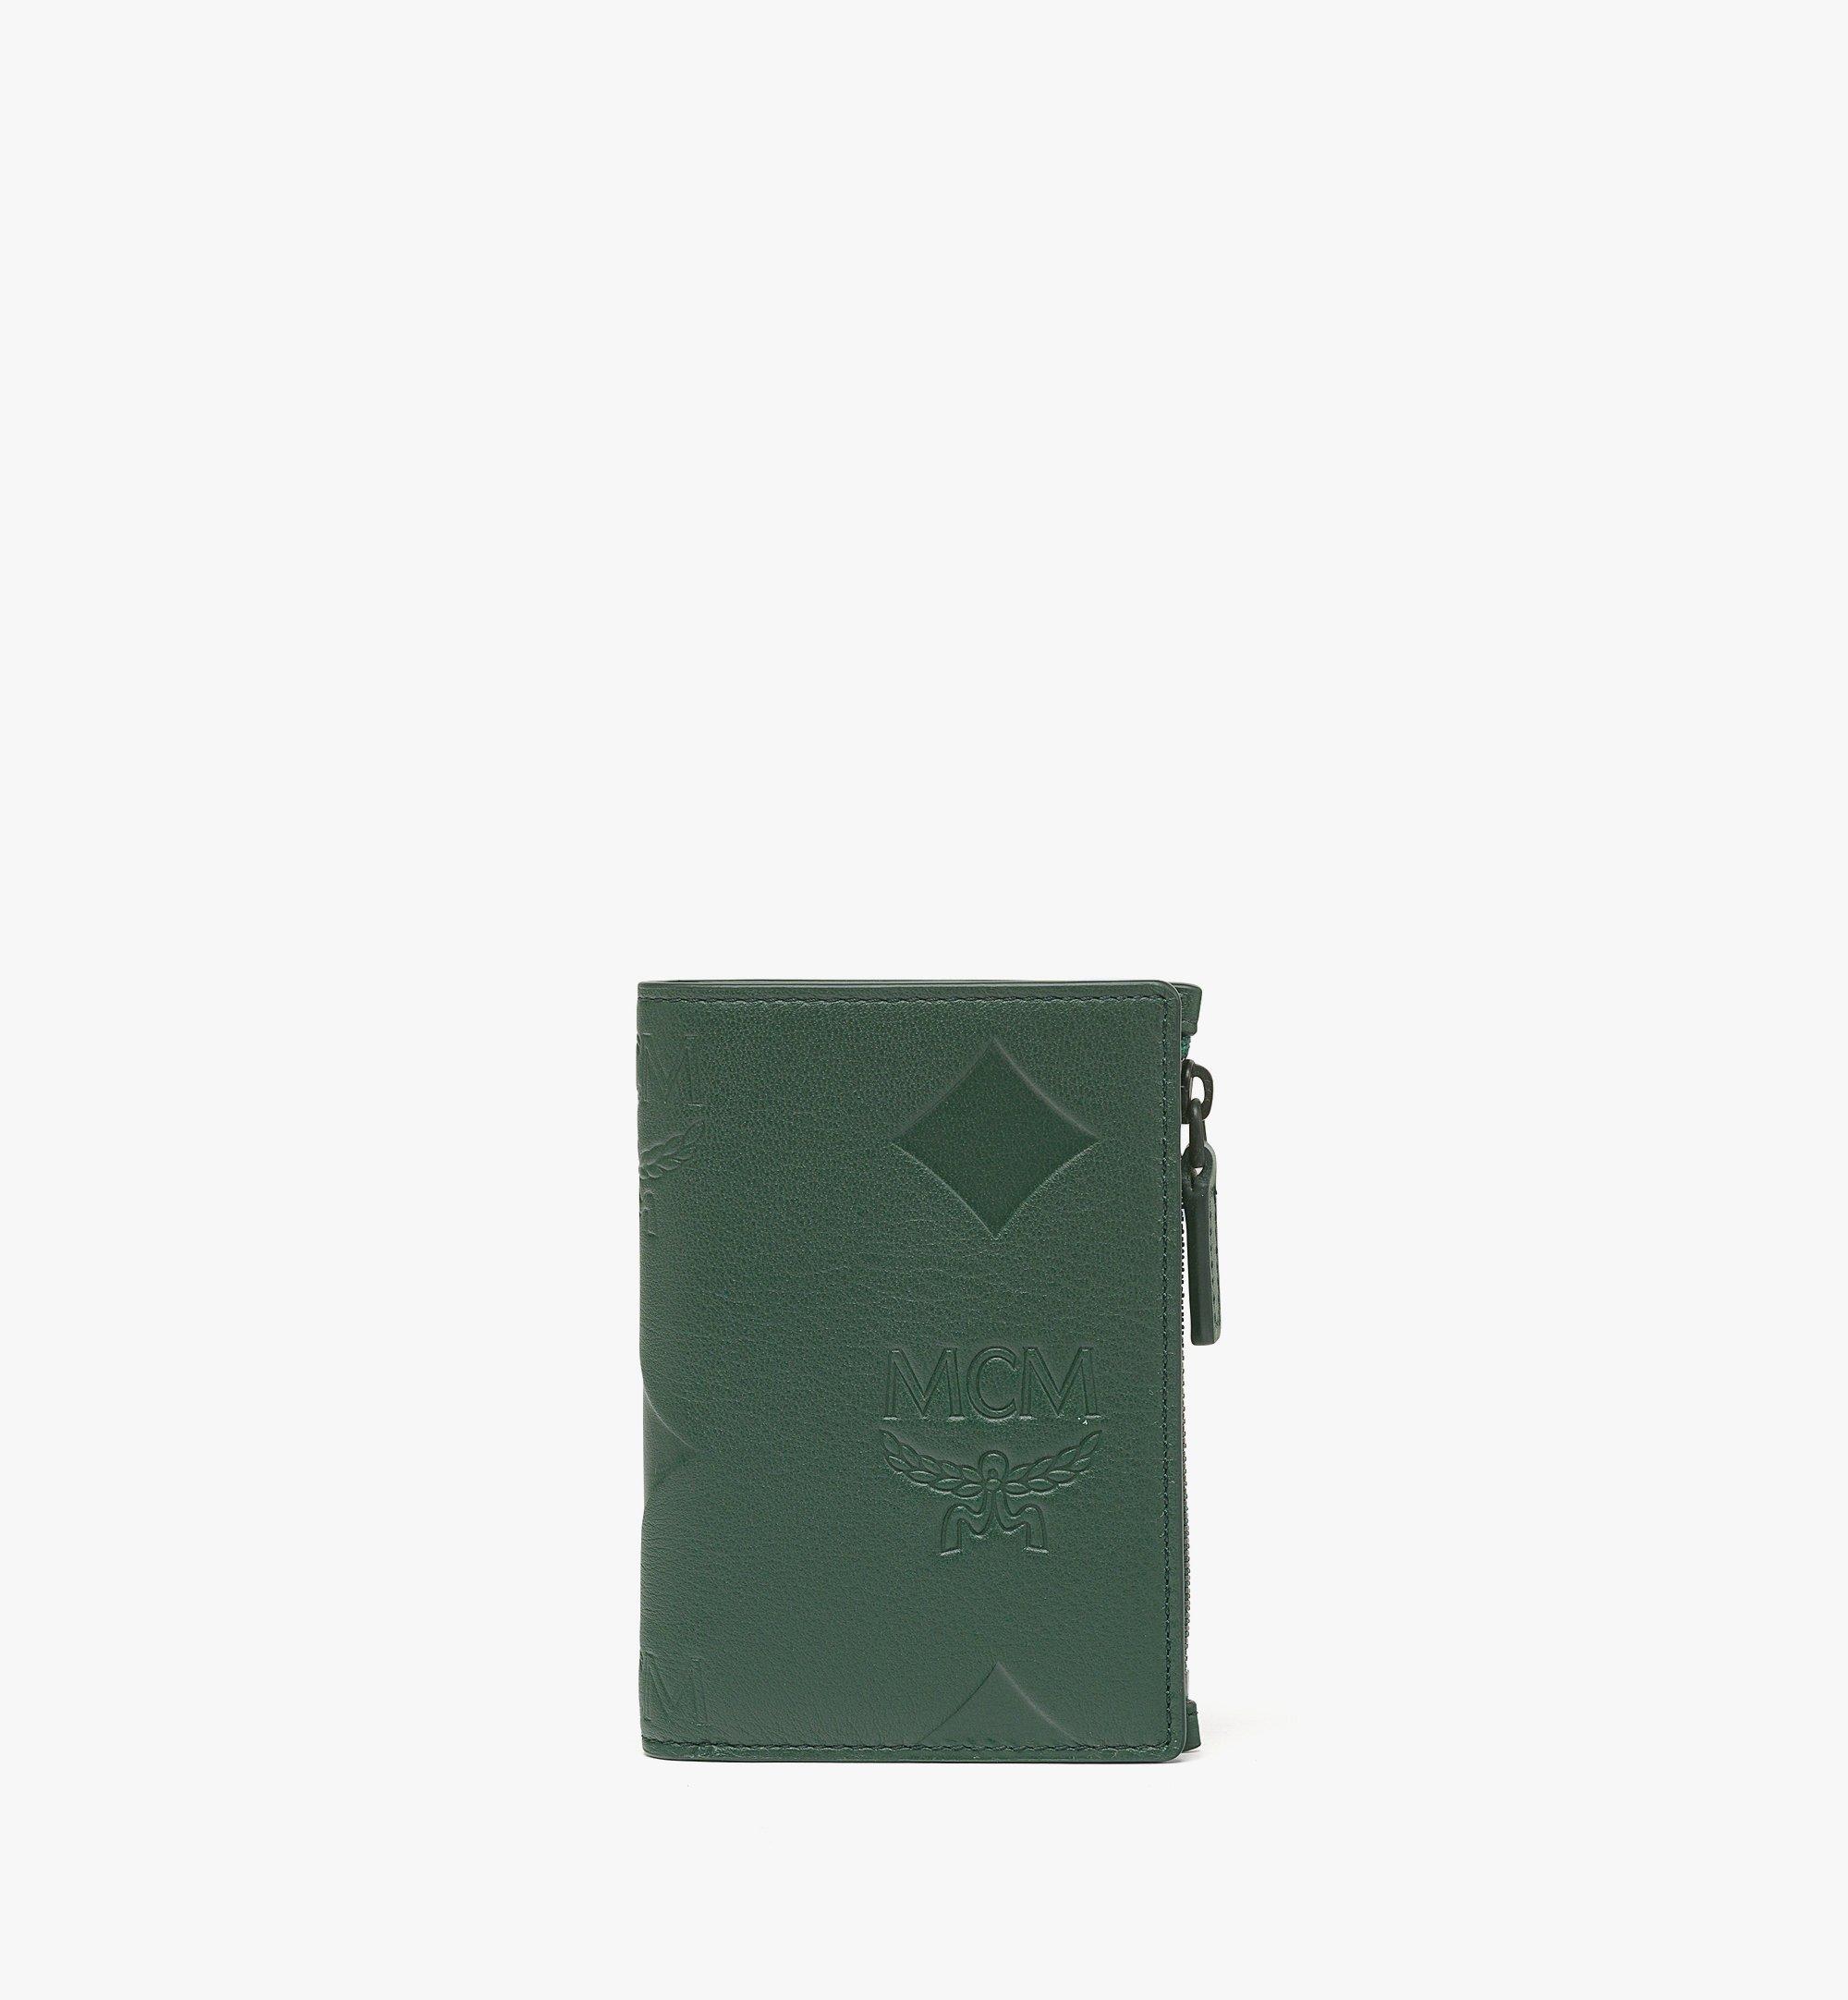 Mcm Aren Snap Wallet In Maxi Monogram Leather In Forest Green